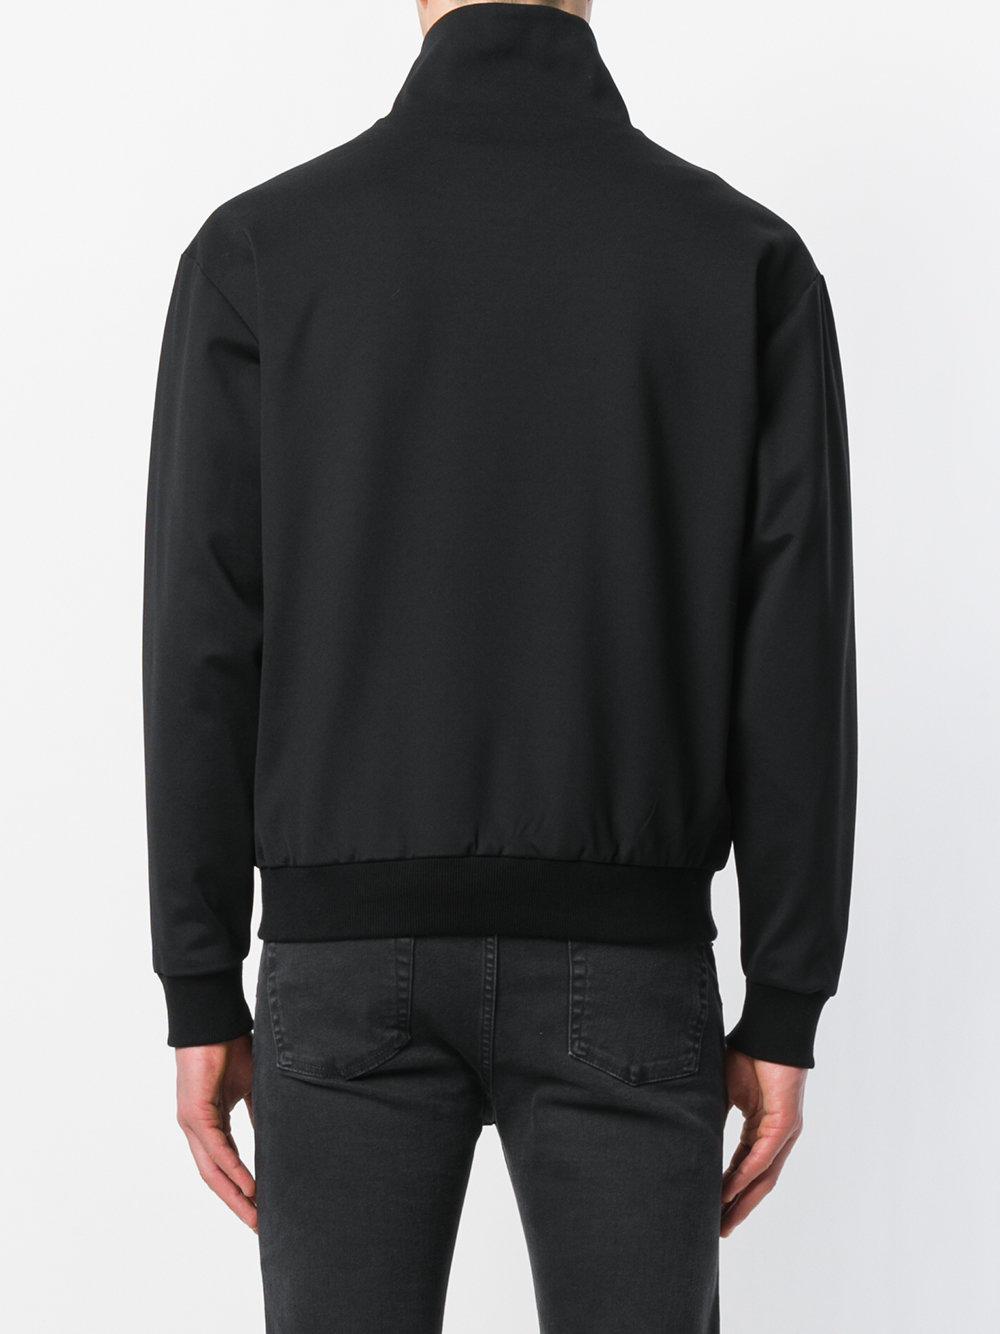 Balenciaga Synthetic Tracksuit Jacket in Black for Men - Lyst